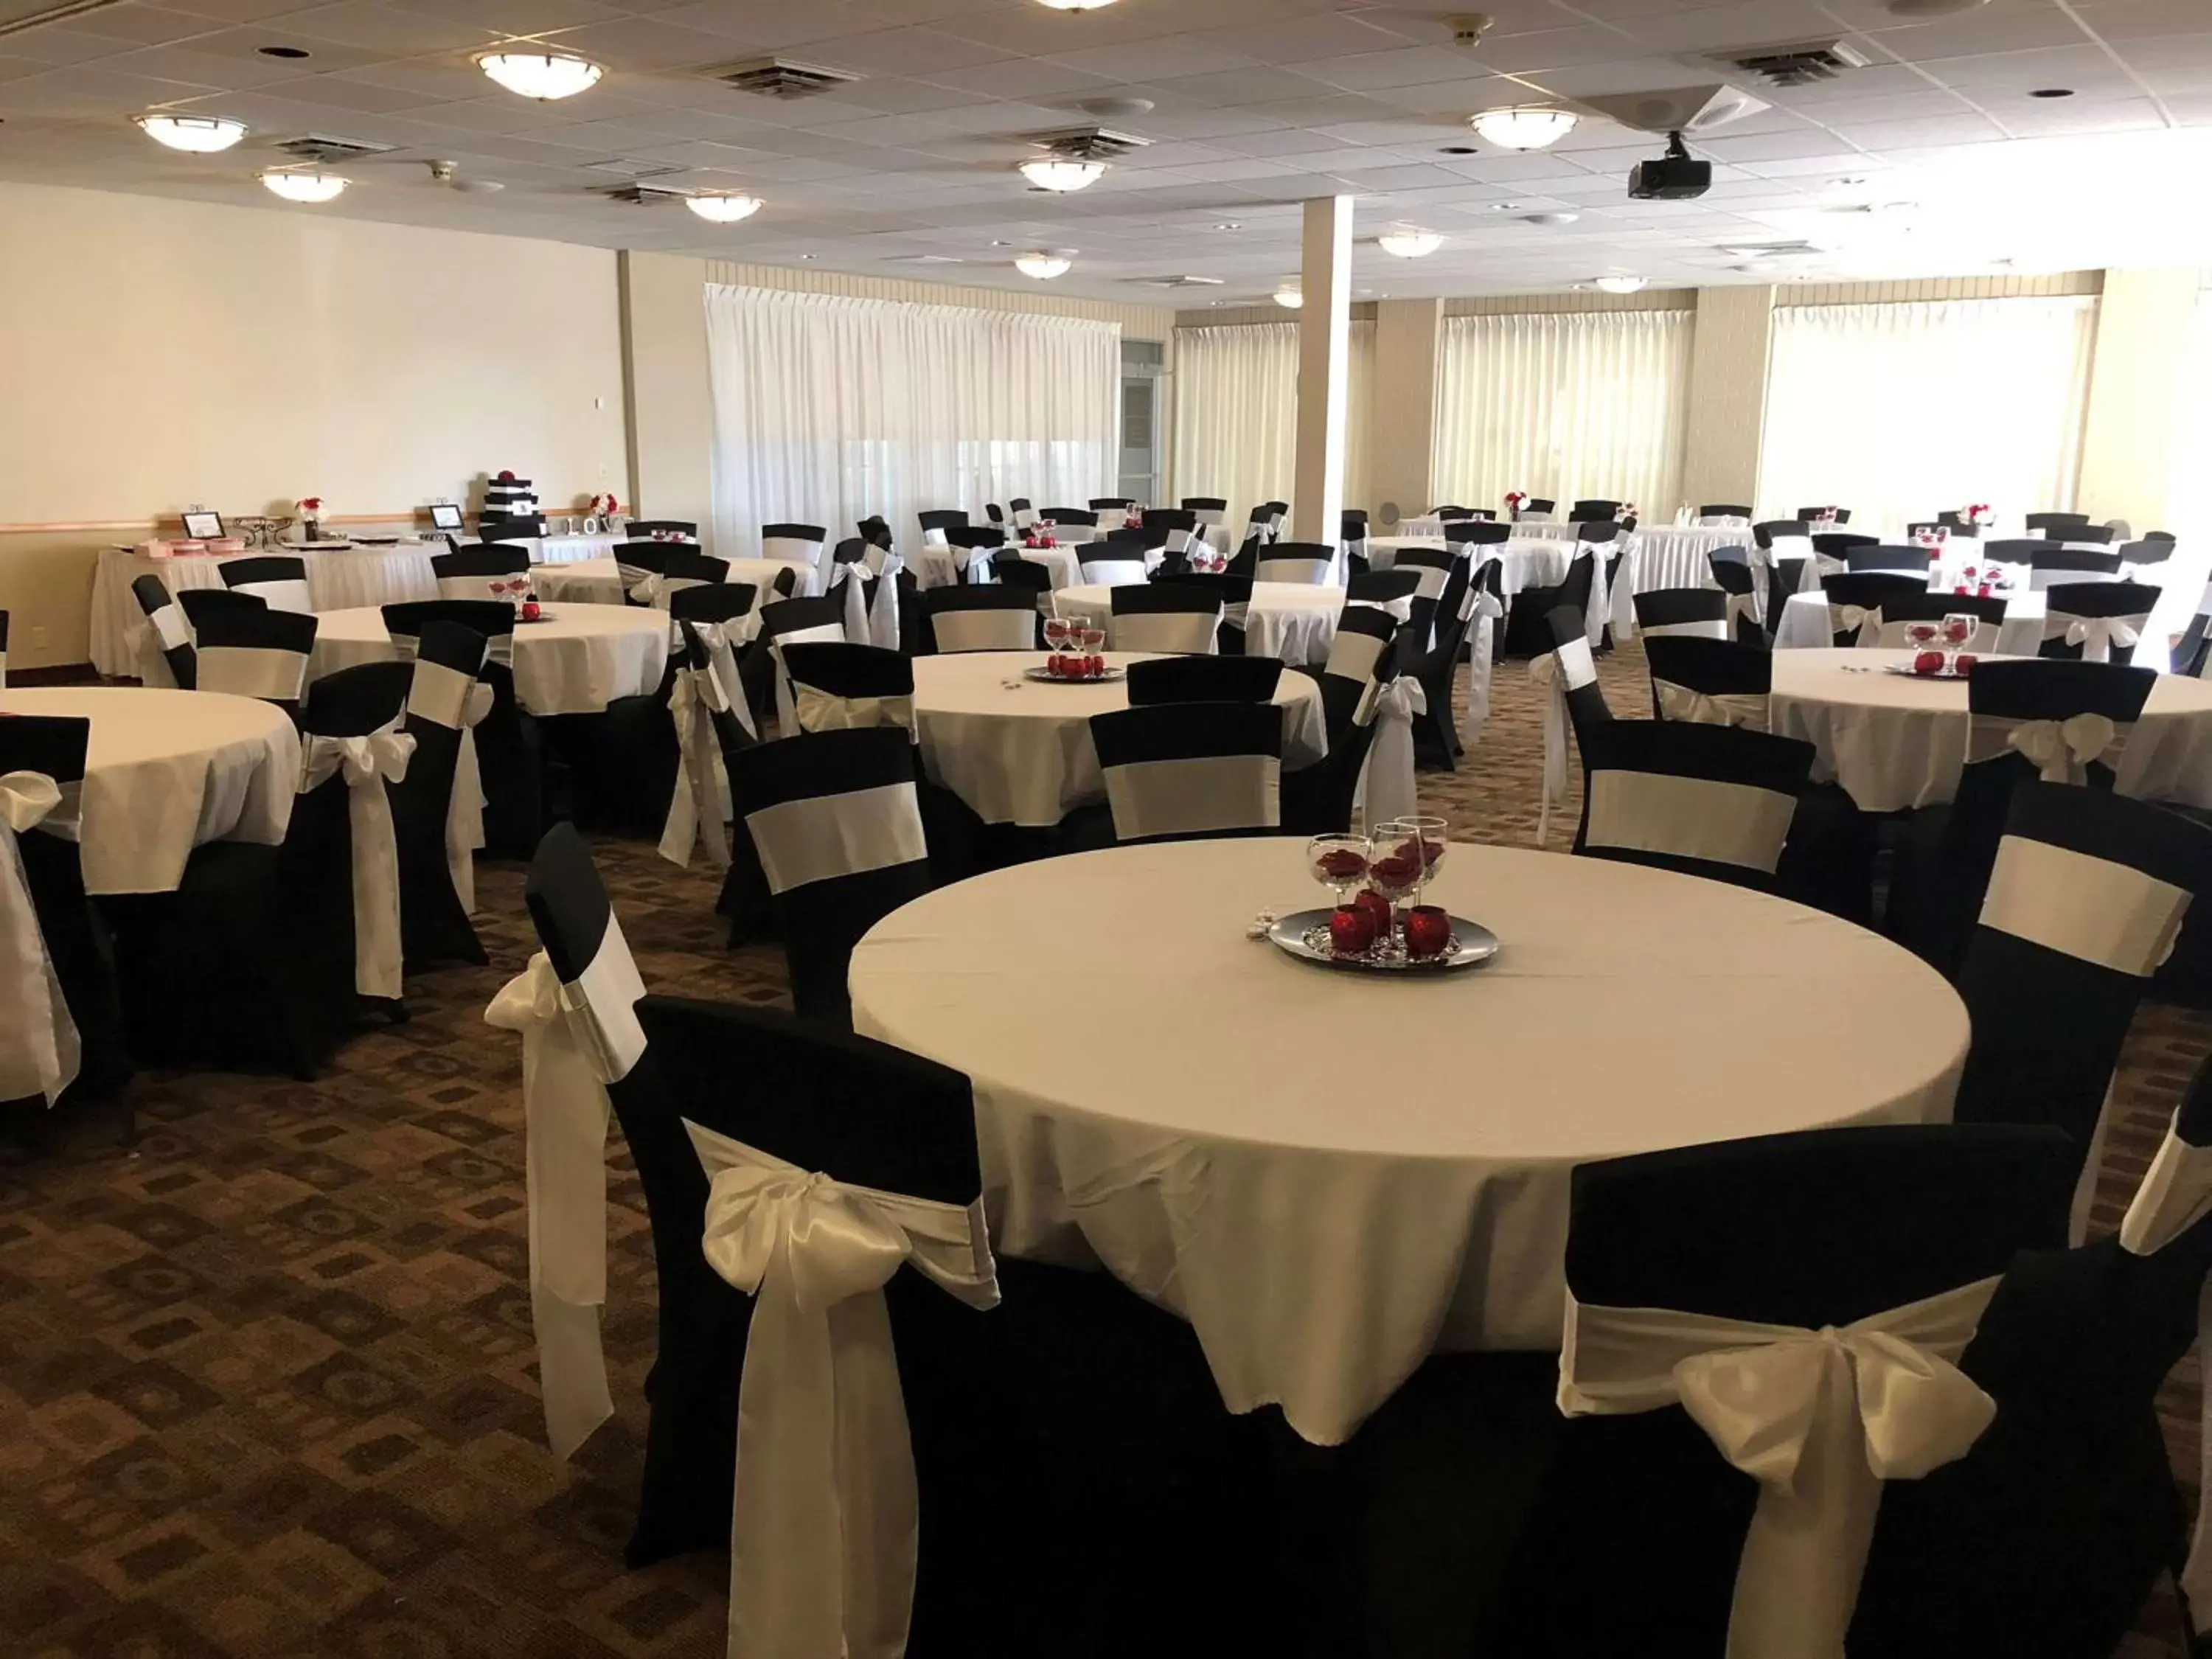 On site, Banquet Facilities in Best Western Tomah Hotel